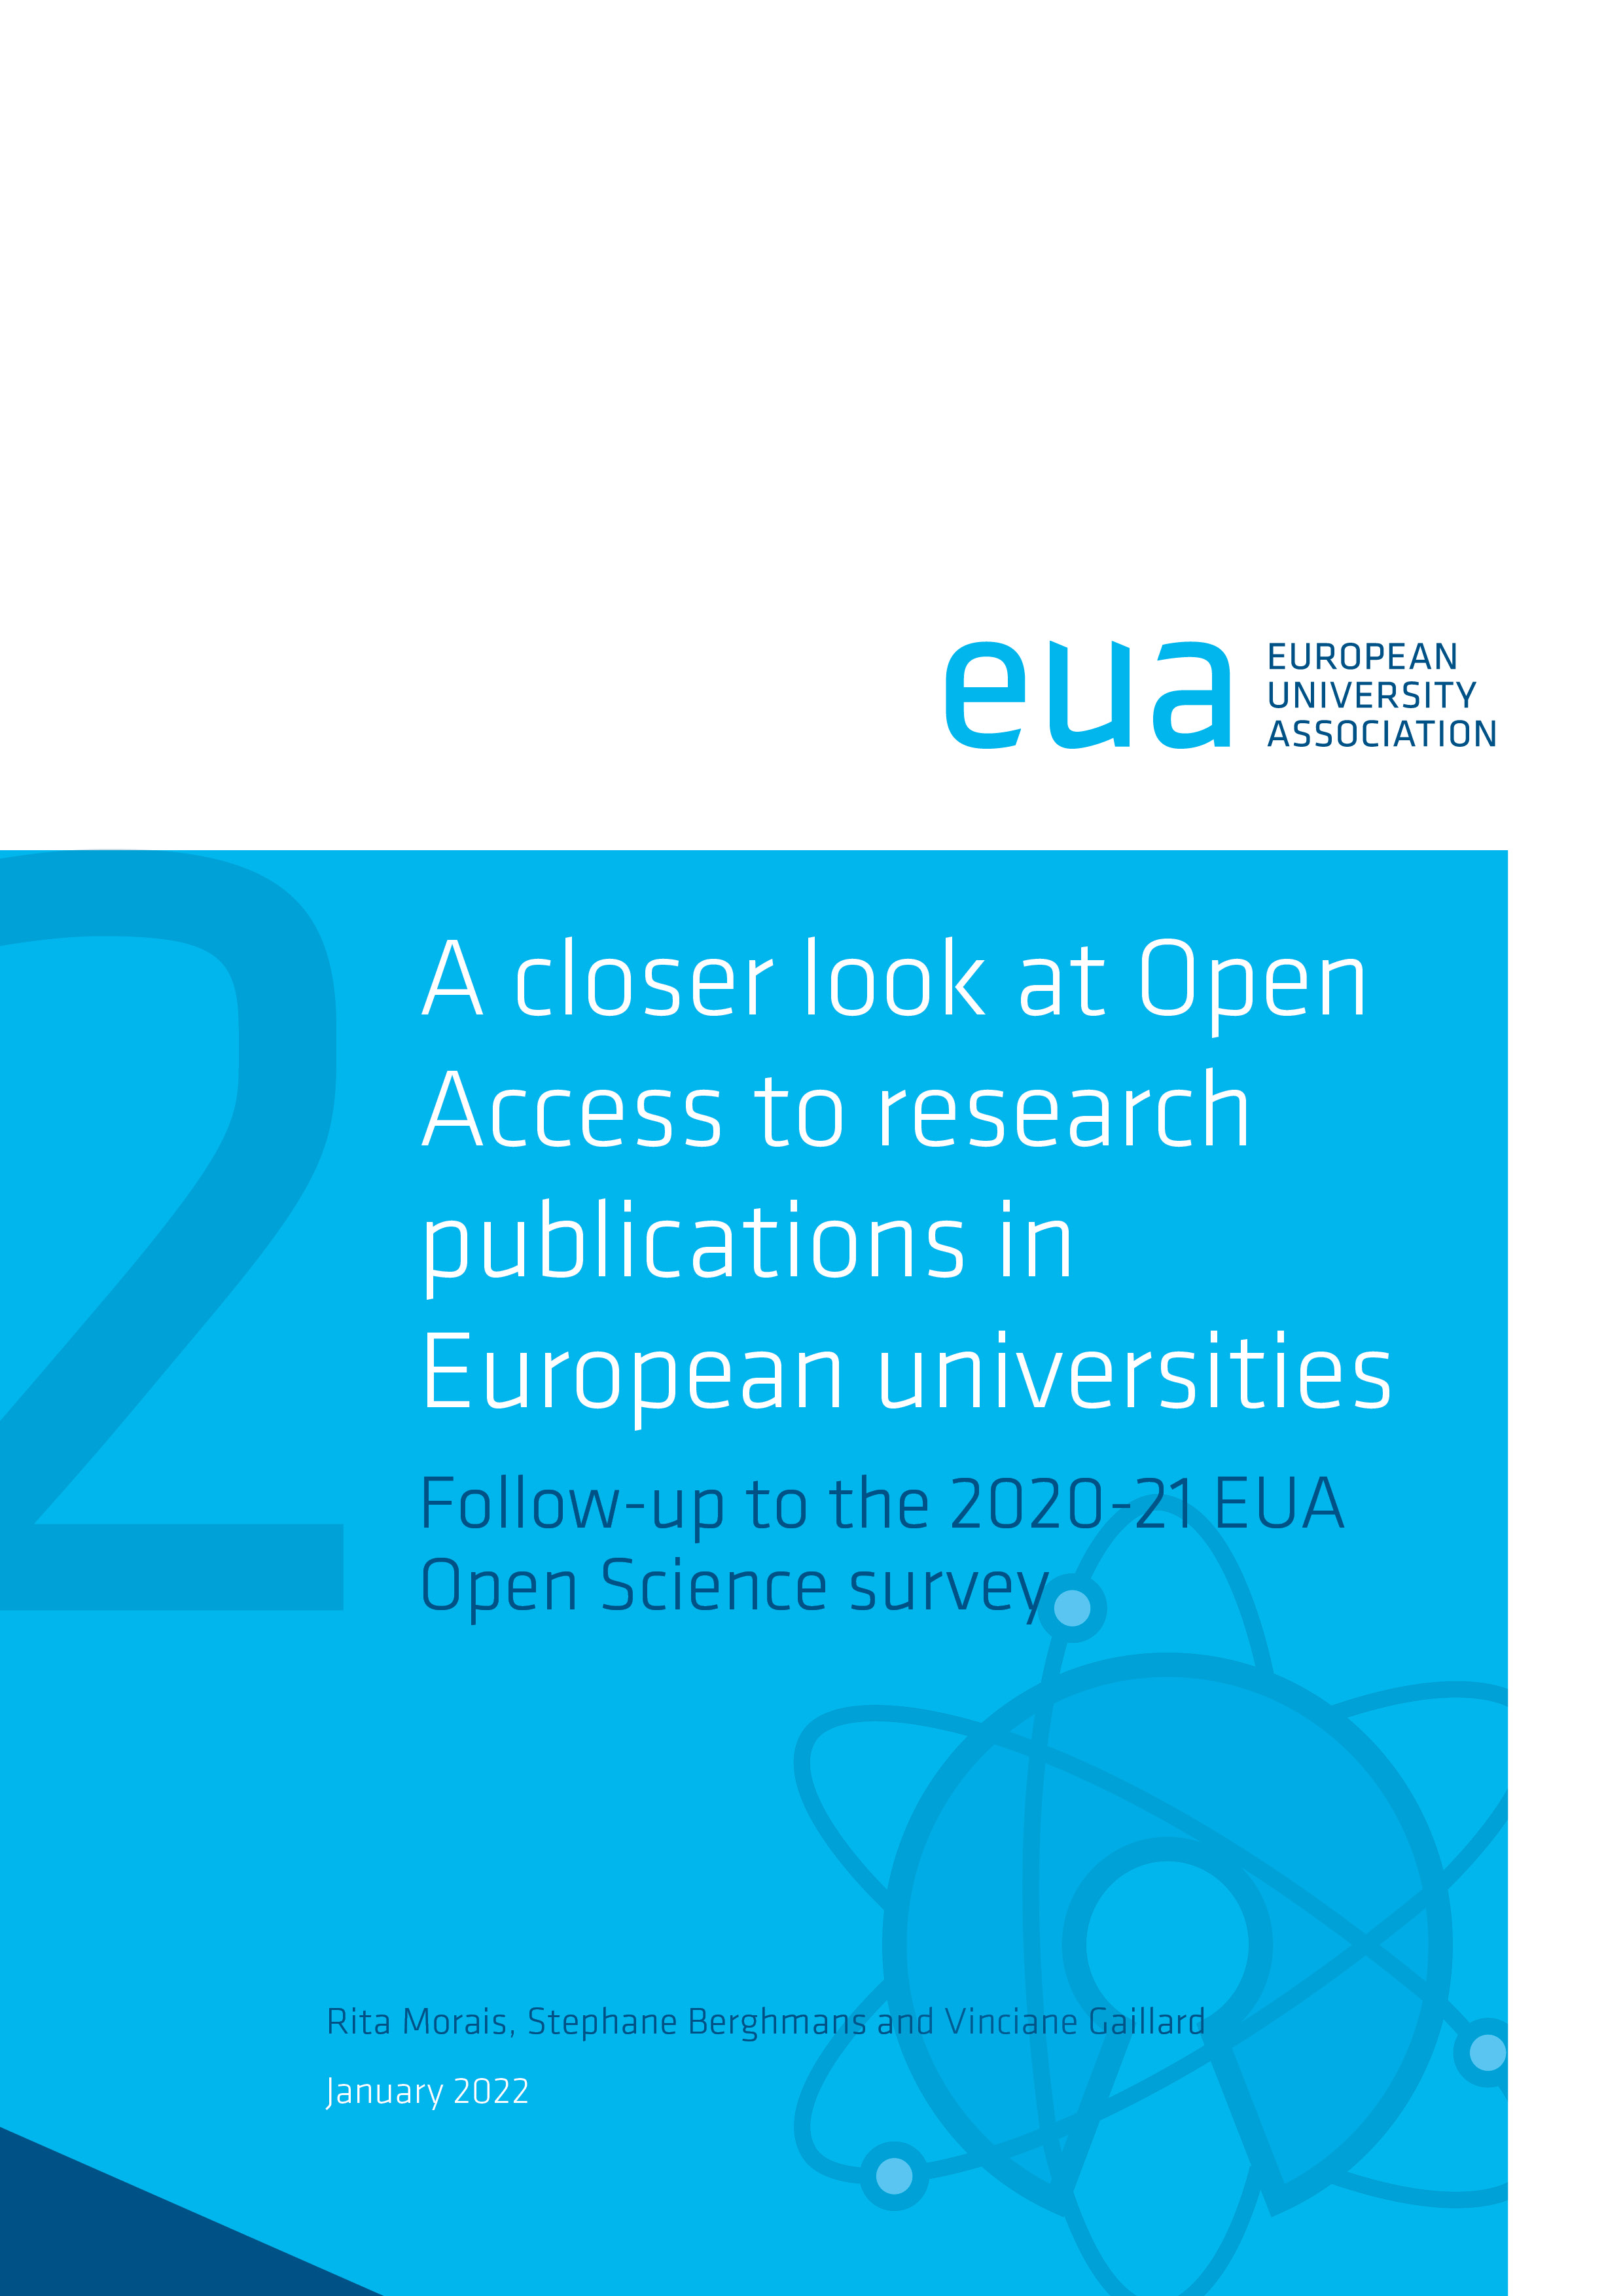 A closer look at Open Access to research publications in European universities